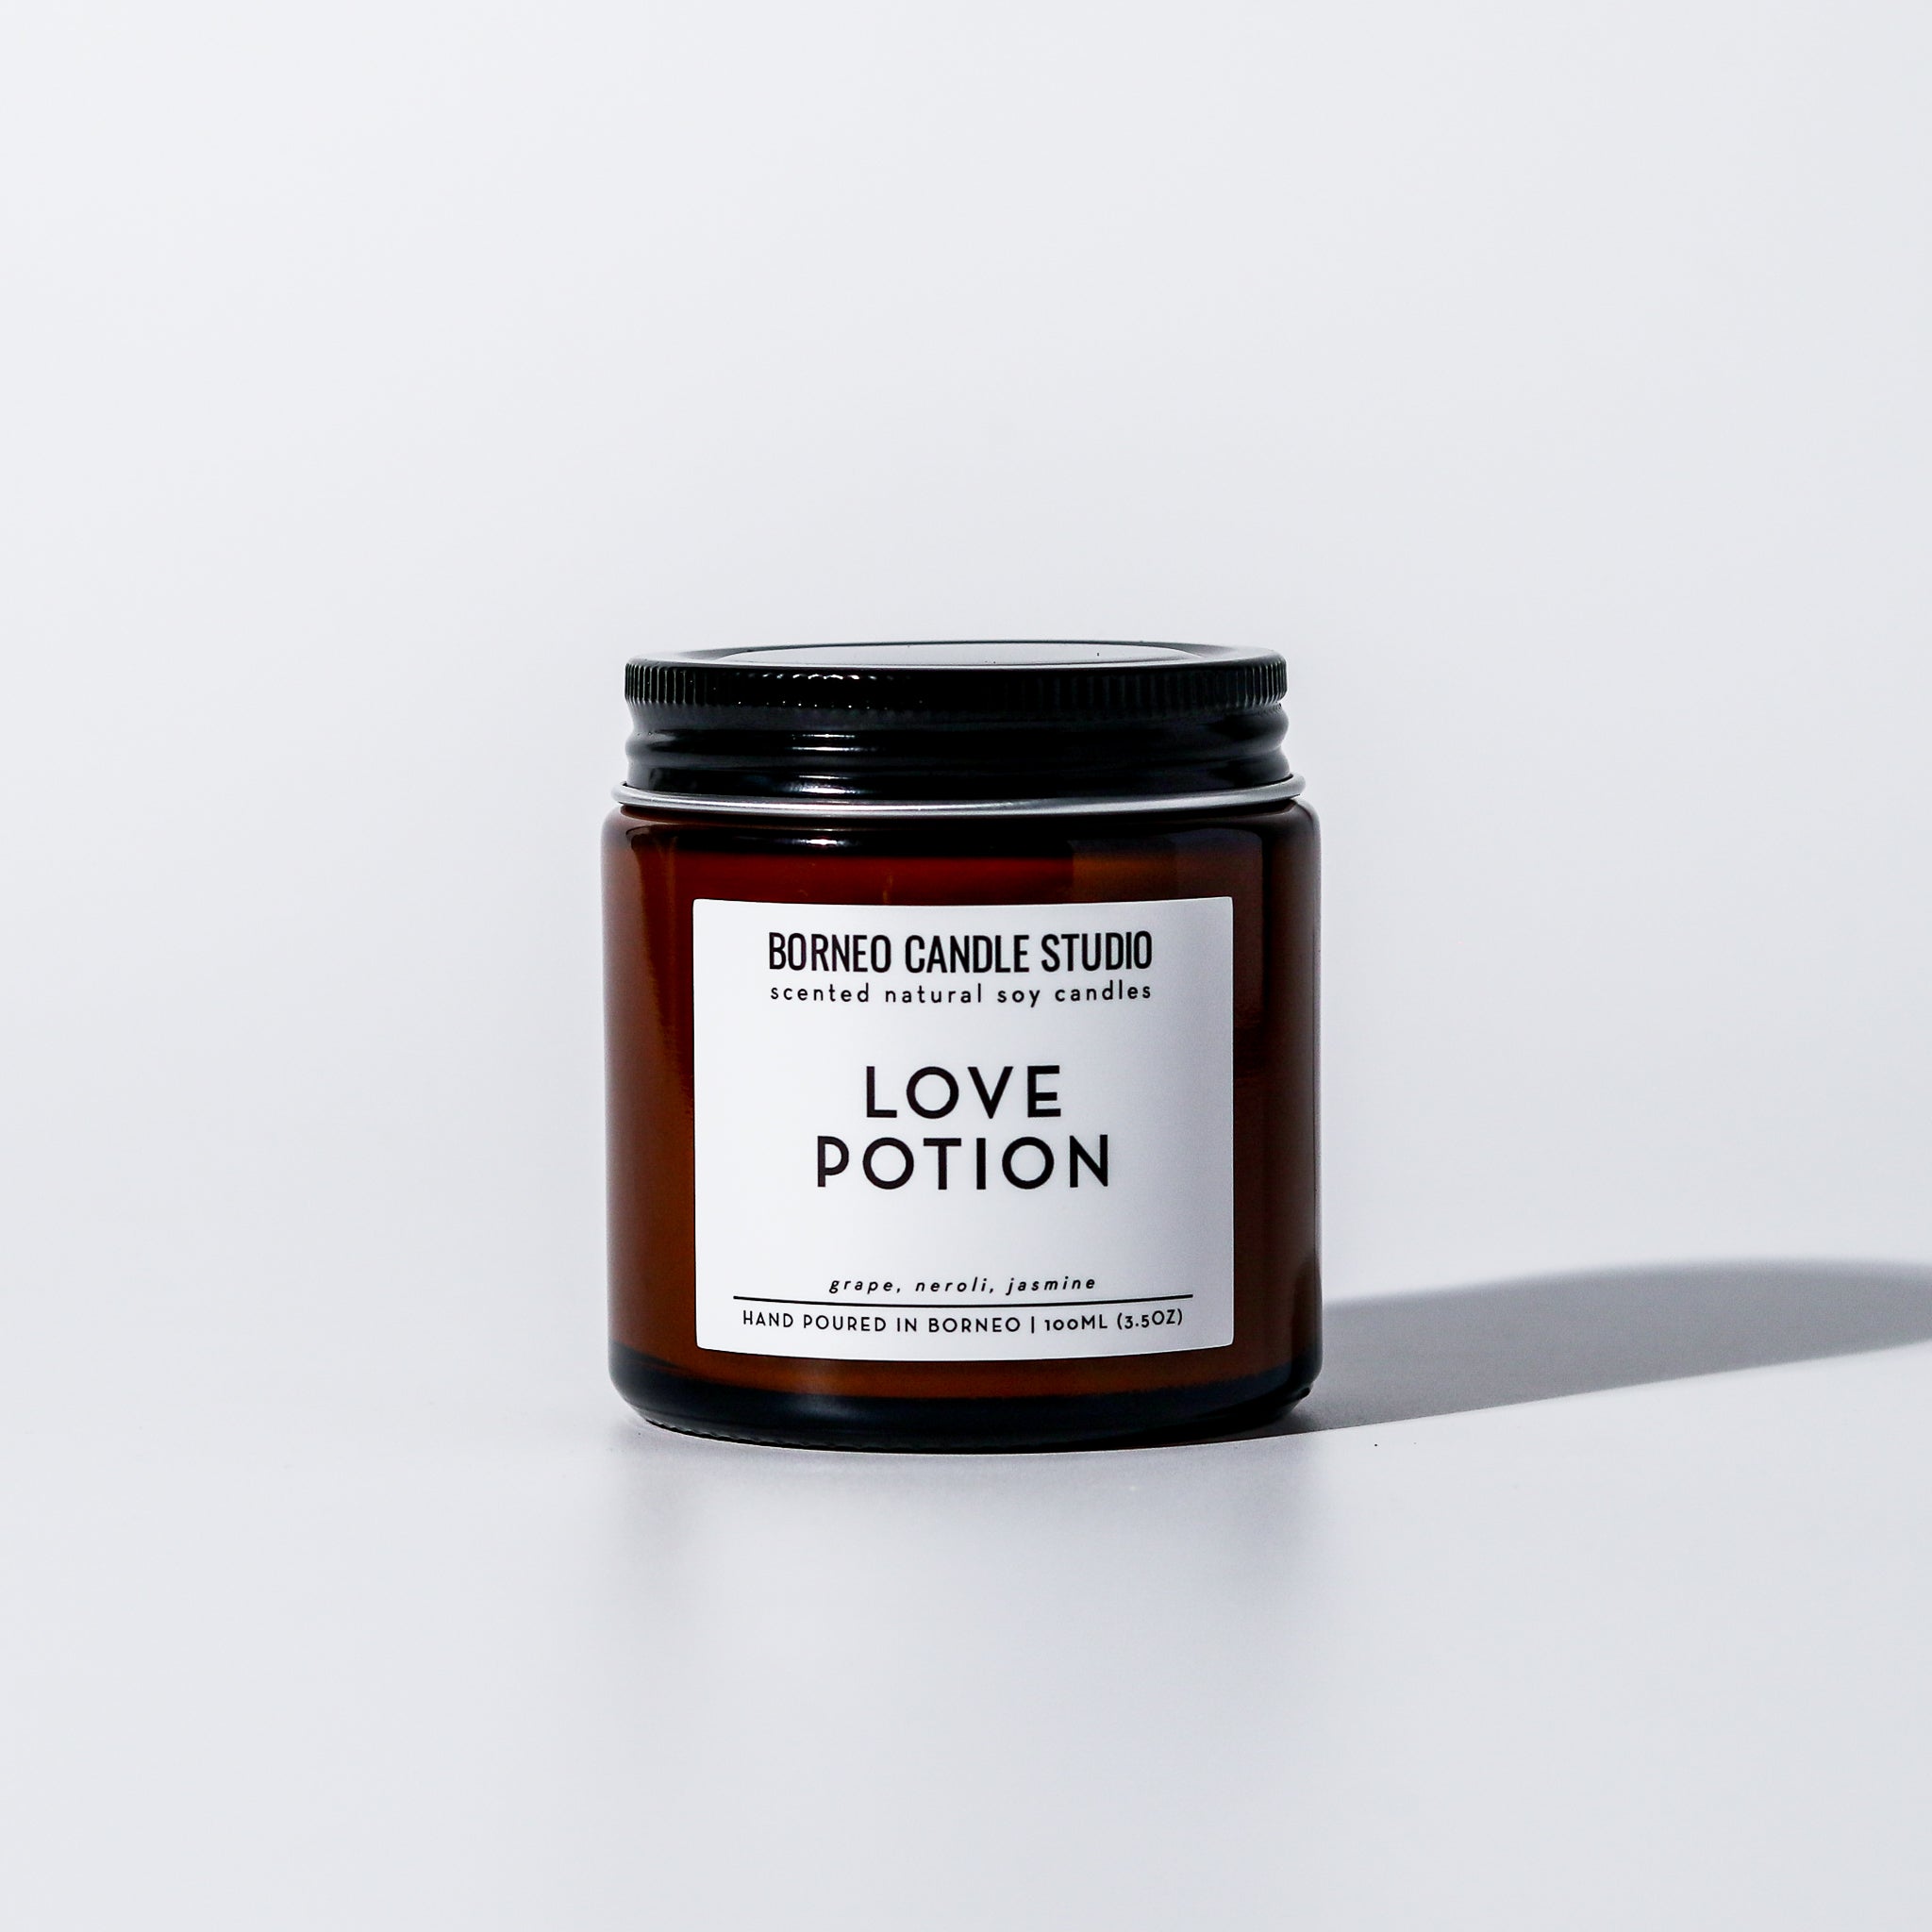 Love Potion Soy Candle - Borneo Candle Studio